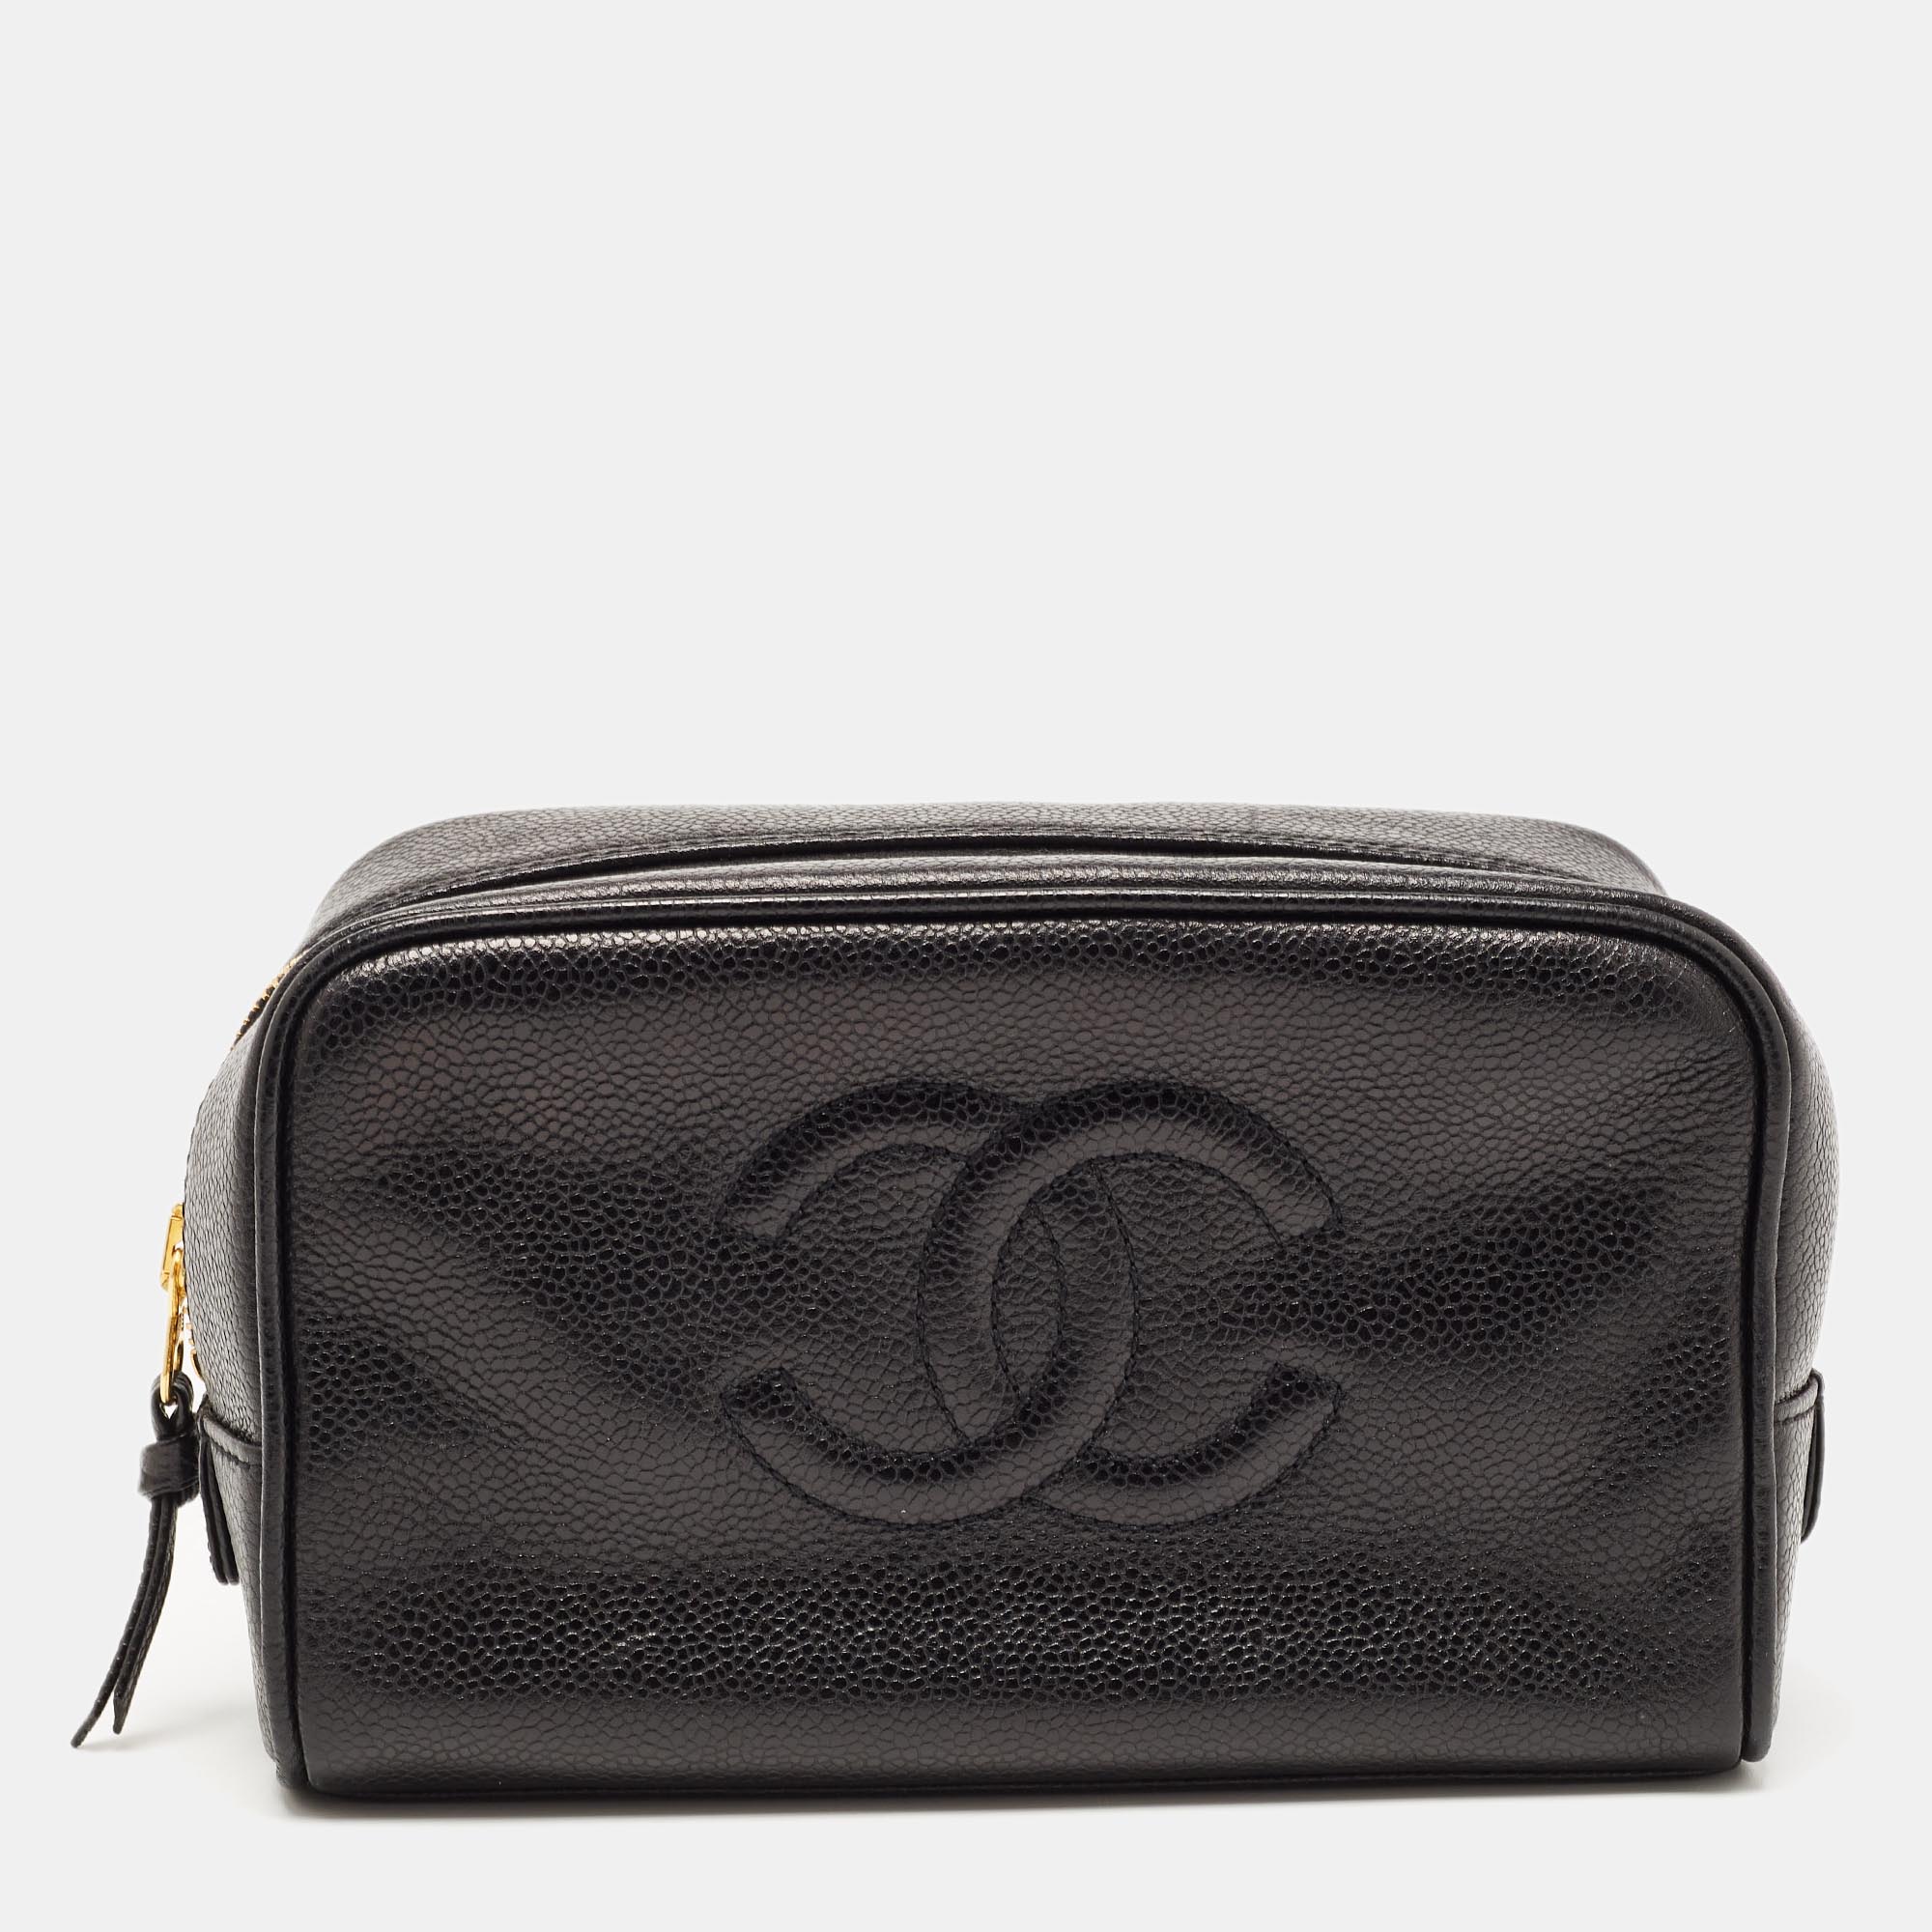 Chanel Black Caviar Leather CC Cosmetic Pouch